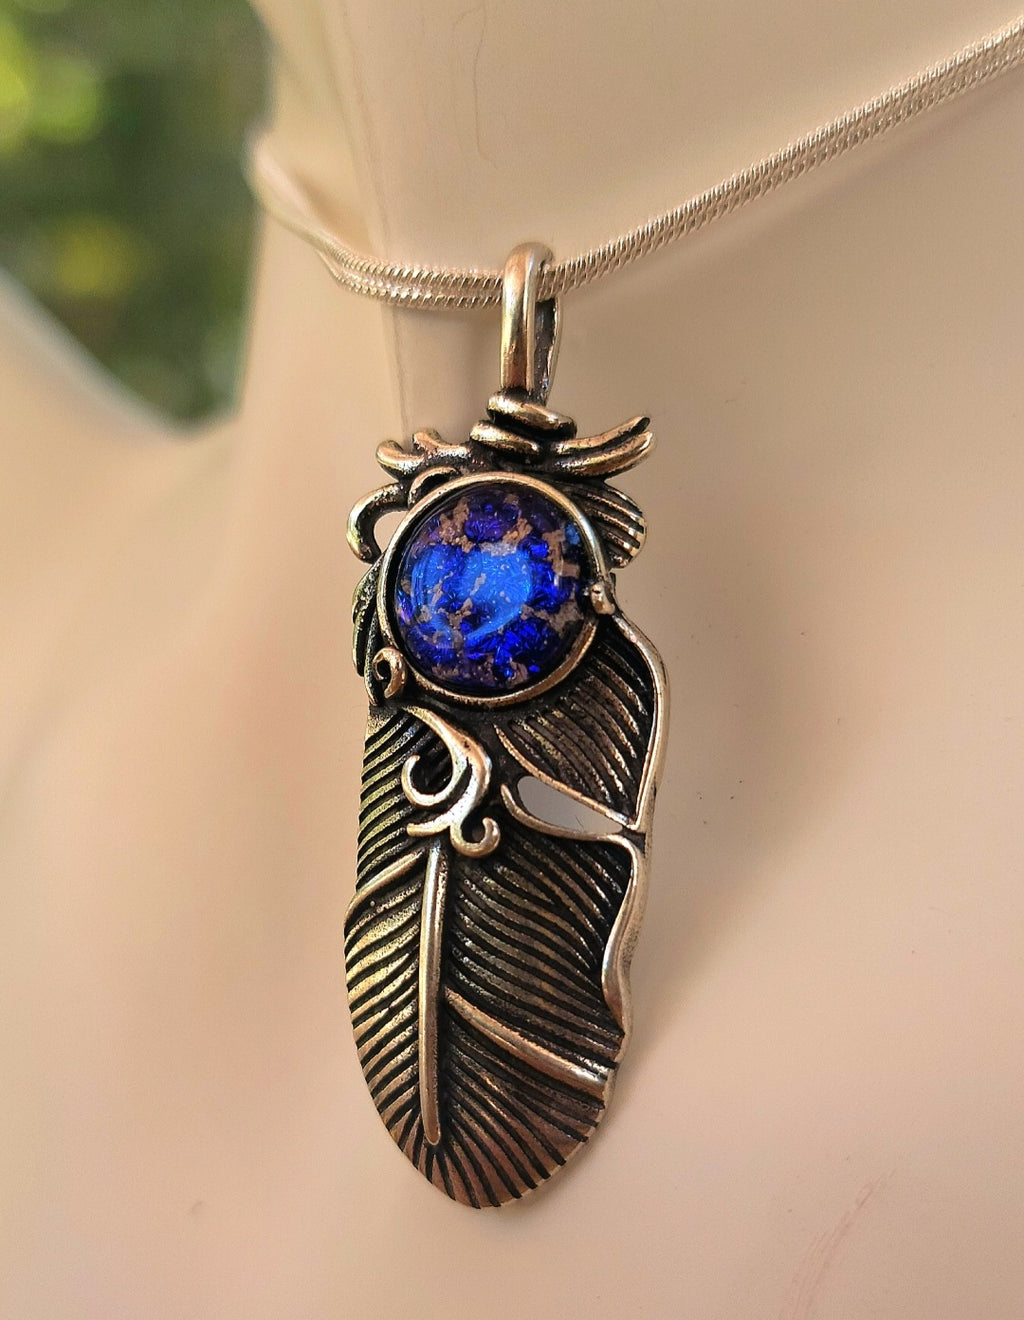 NEW Boho Feather Cremation Jewelry 10mm Ashes InFused Glass Pendant Sterling Silver